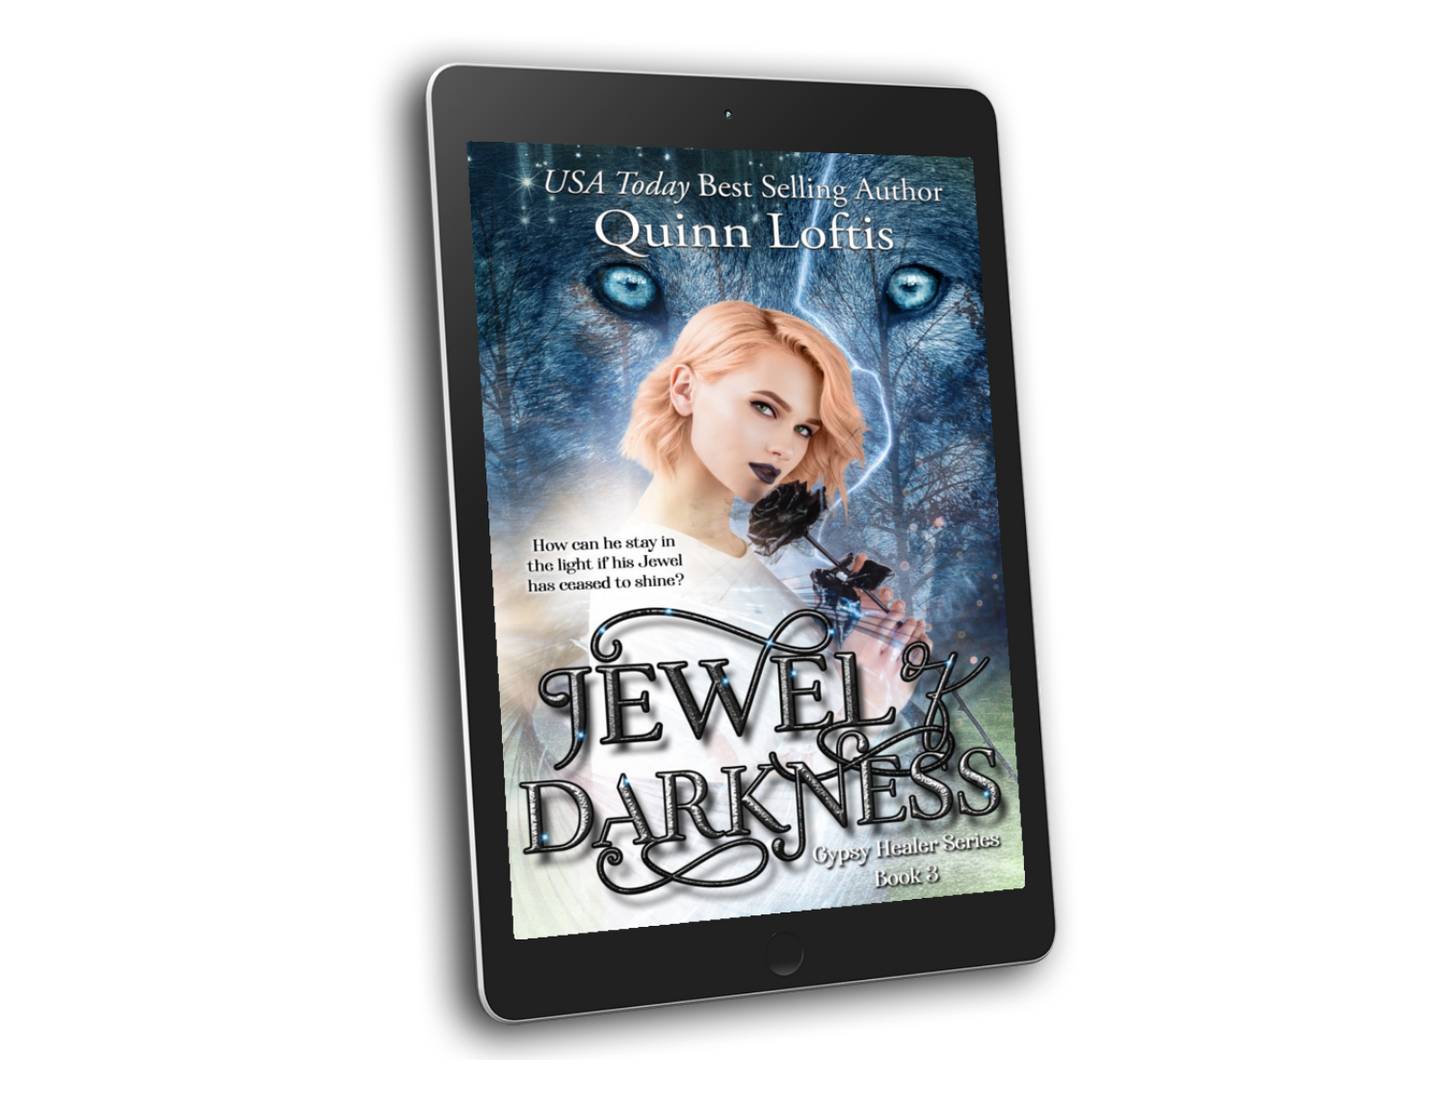 Jewel of Darkness (Book 3 of the Gypsy Healer Series)